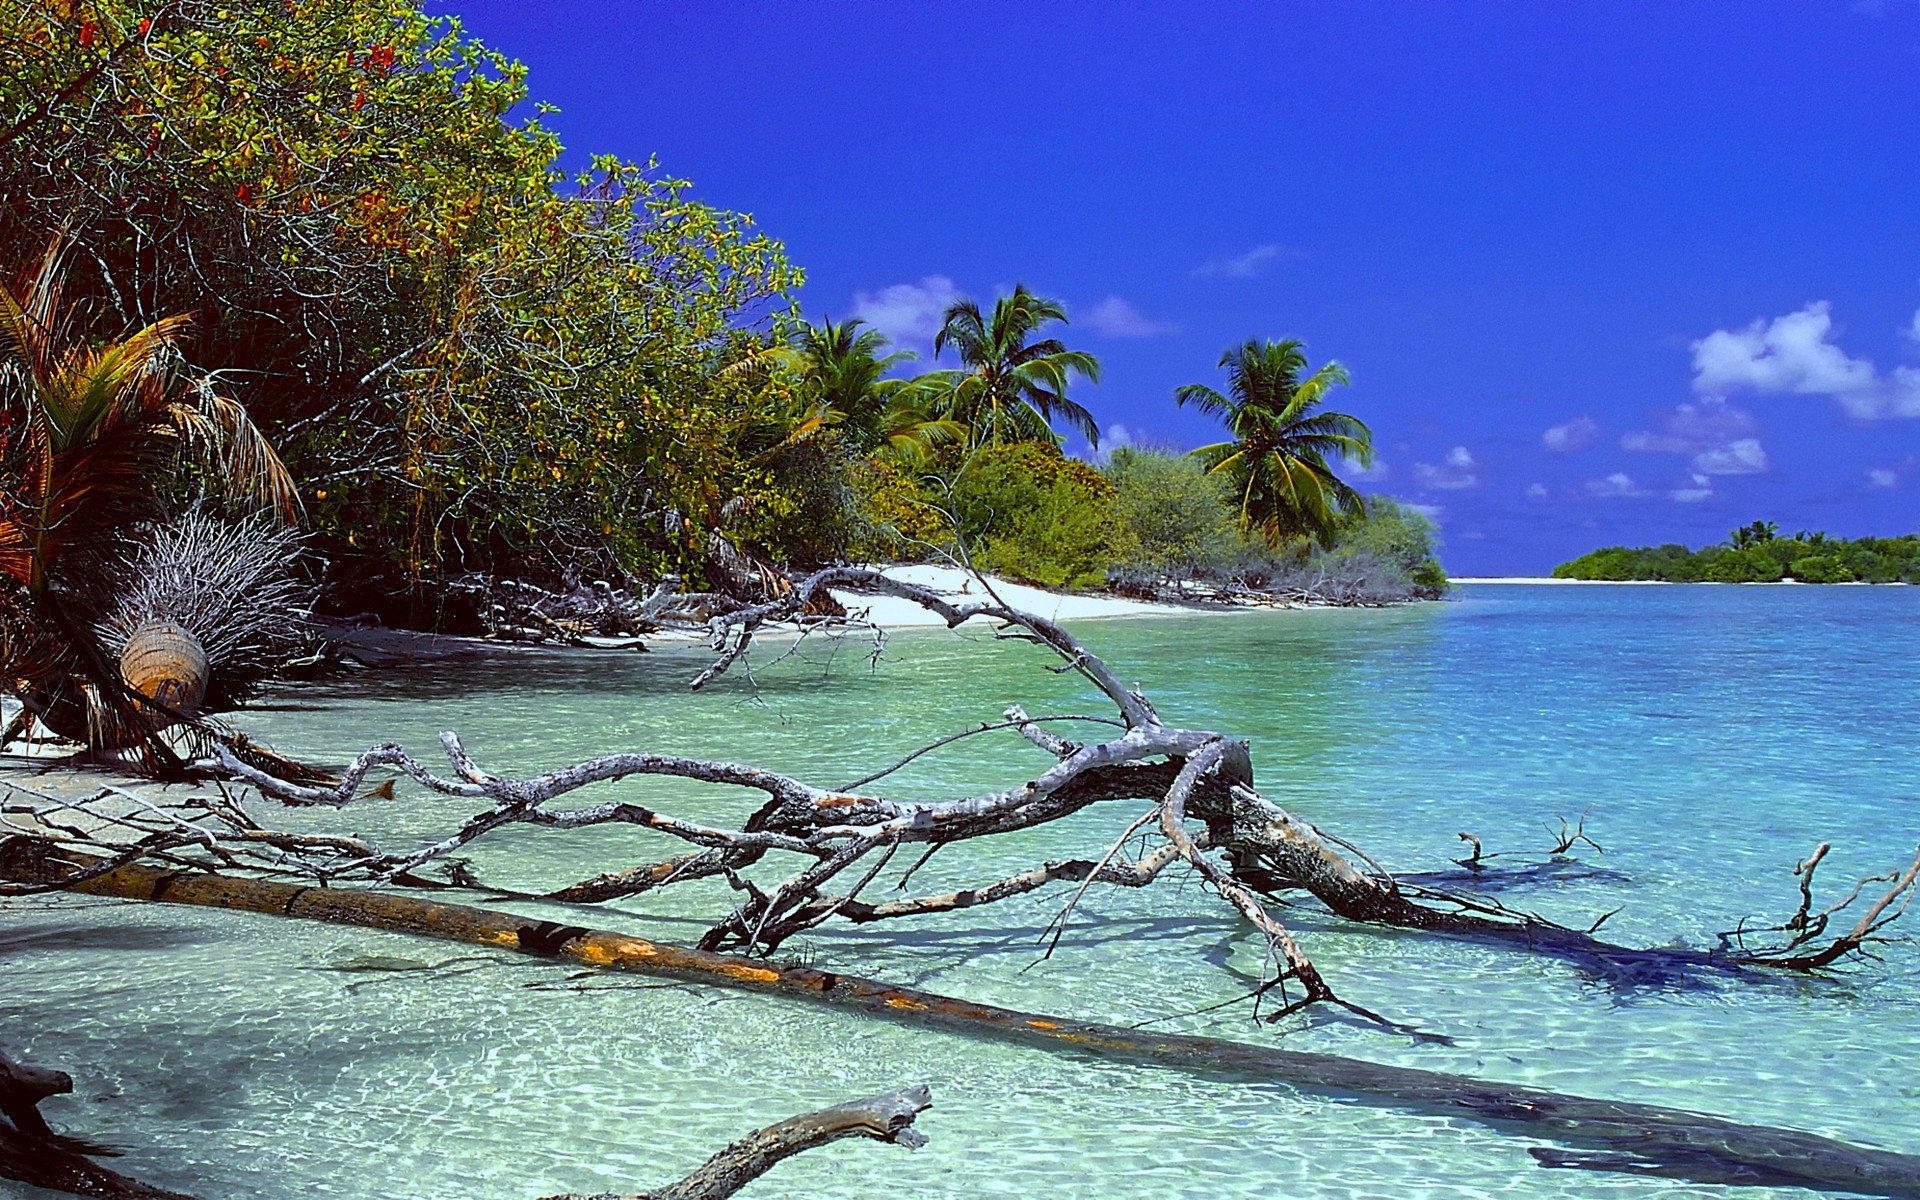 General 1920x1200 nature landscape deserted Island beach trees dead trees palm trees sea sand water tropical summer Maldives